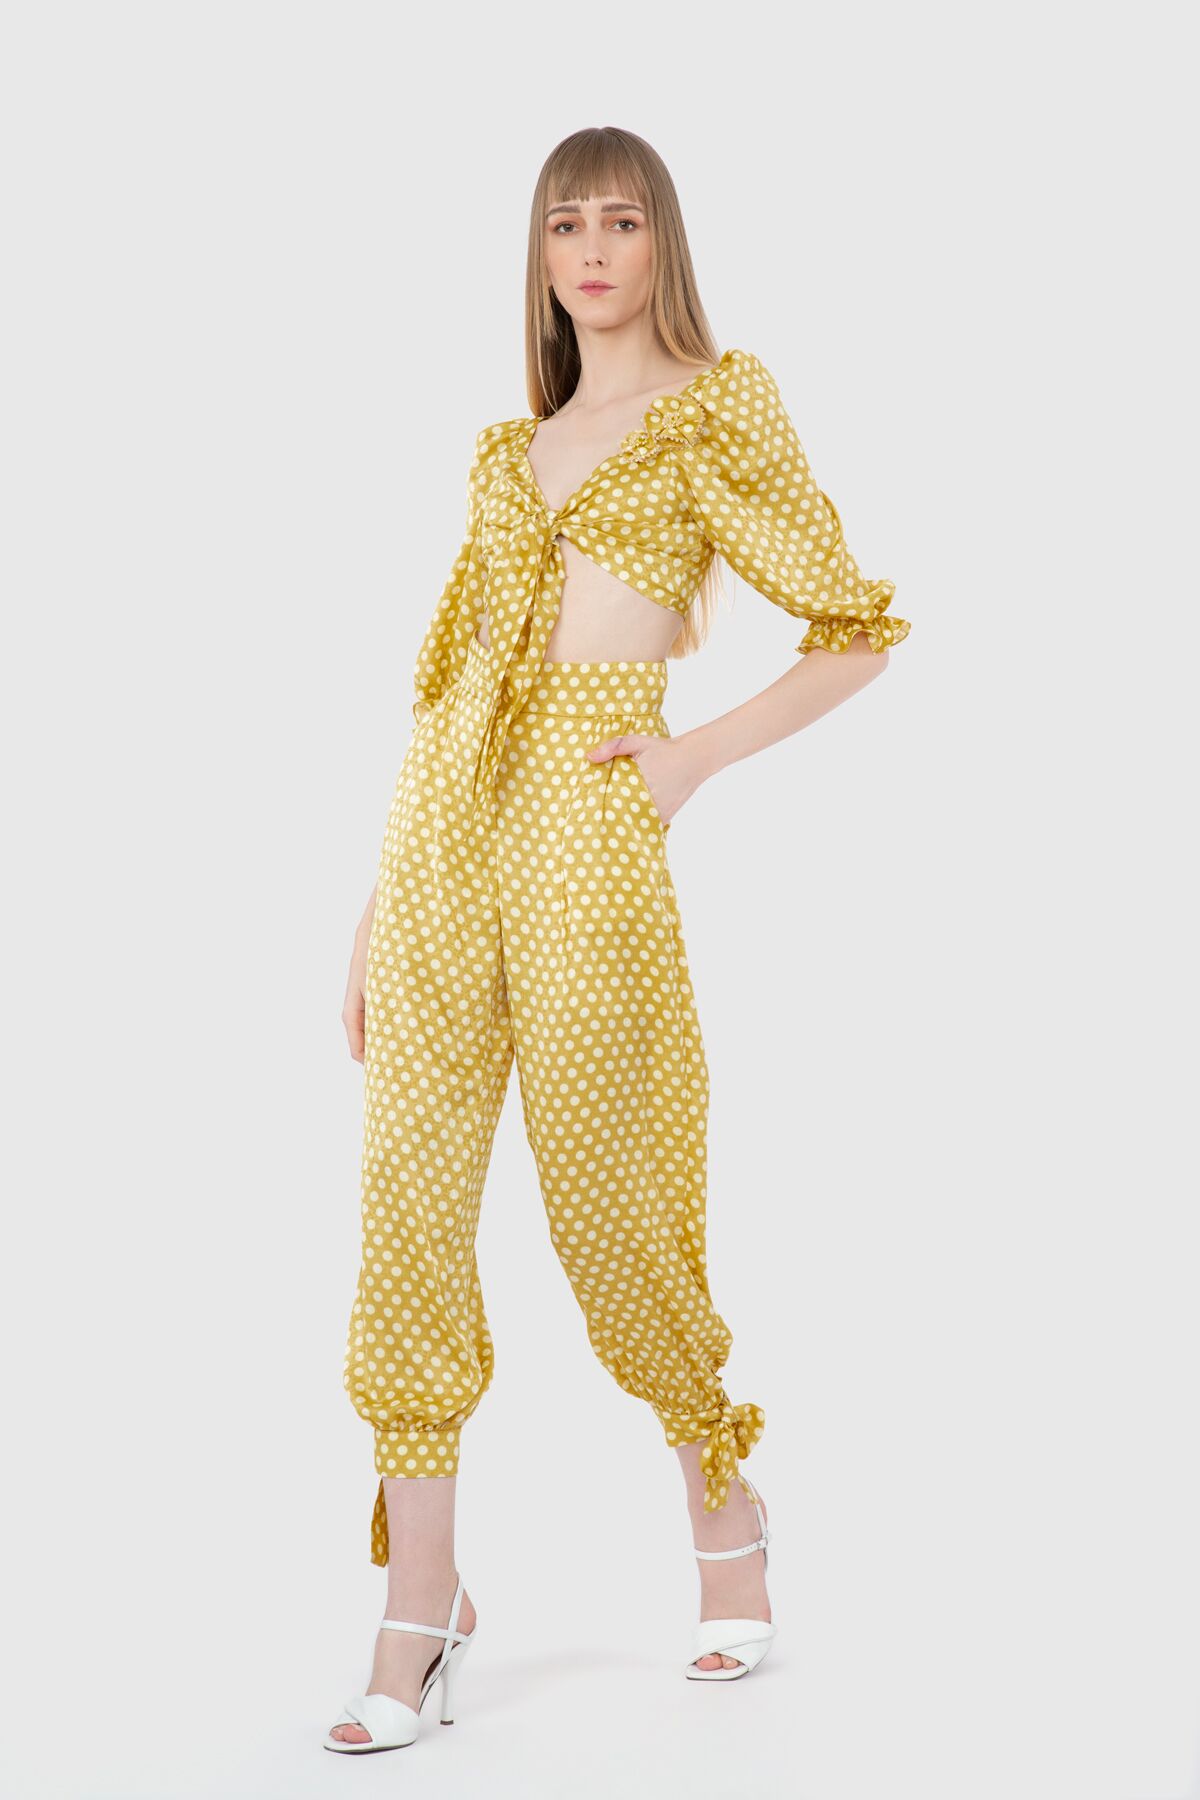  GIZIA - High Waist Tie-Up Casual Yellow Trousers